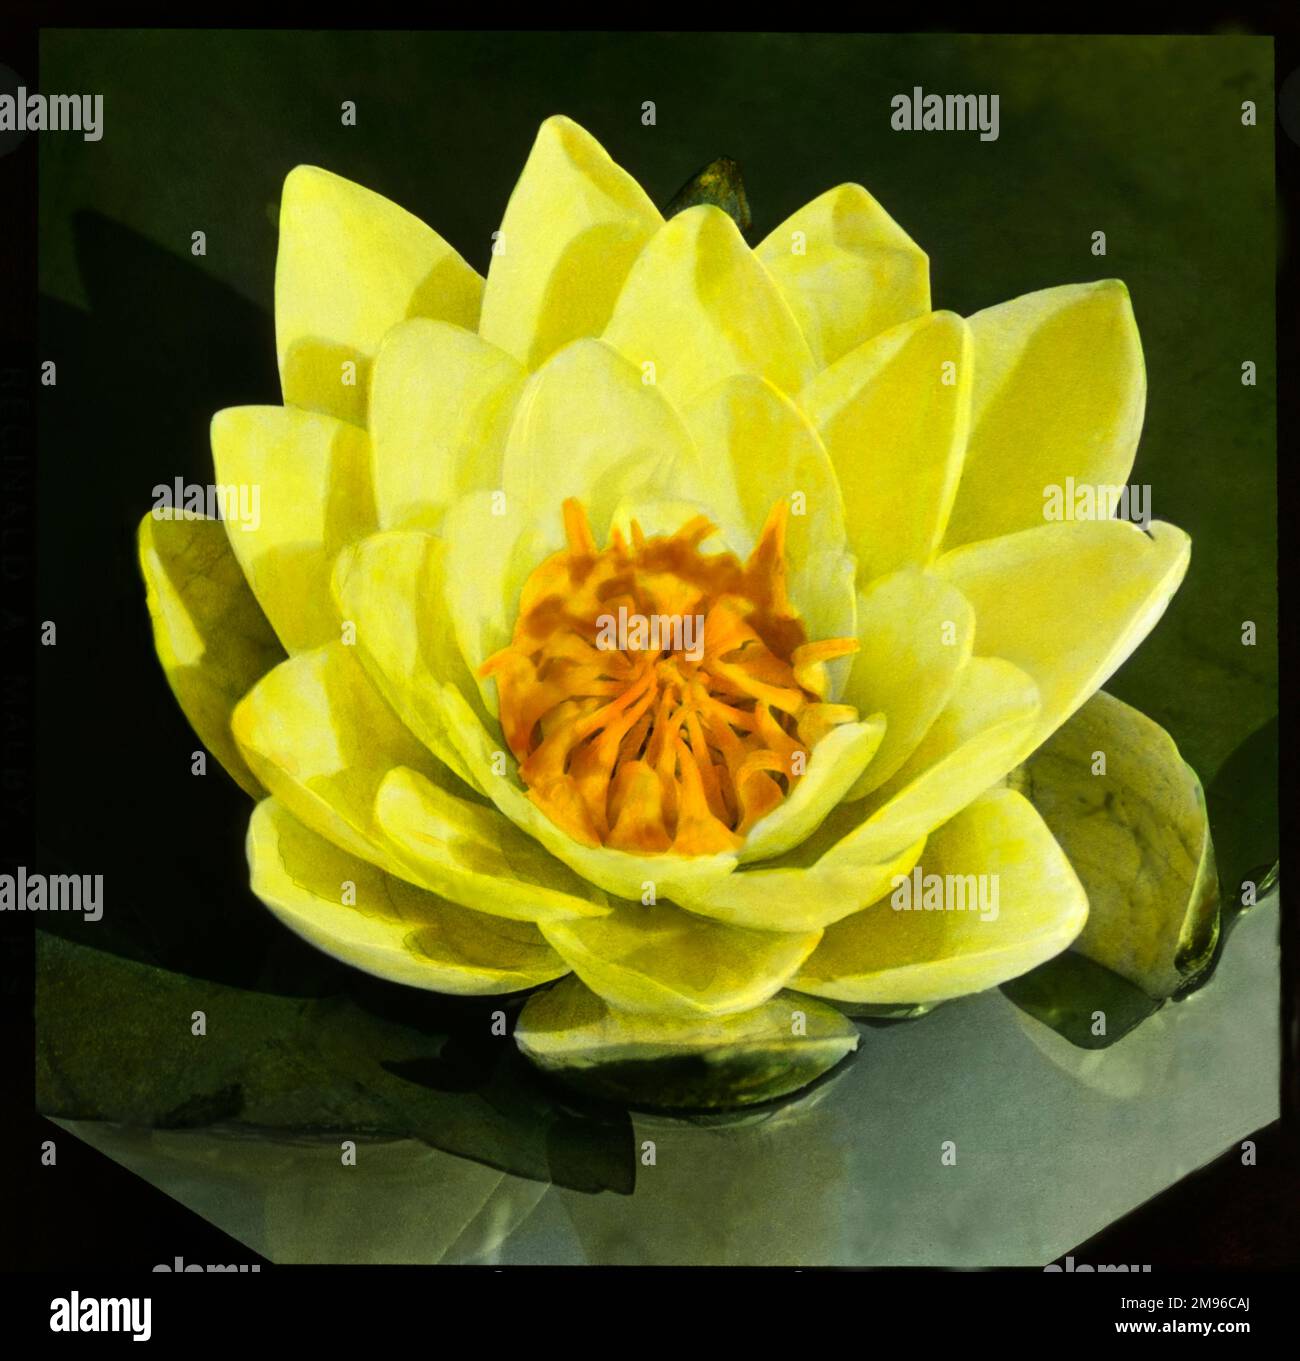 Nymphaea Mooreana (Water Lily), an acquatic plant of the Nymphaeaceae family.  It has a yellow flower with an orange centre. Stock Photo